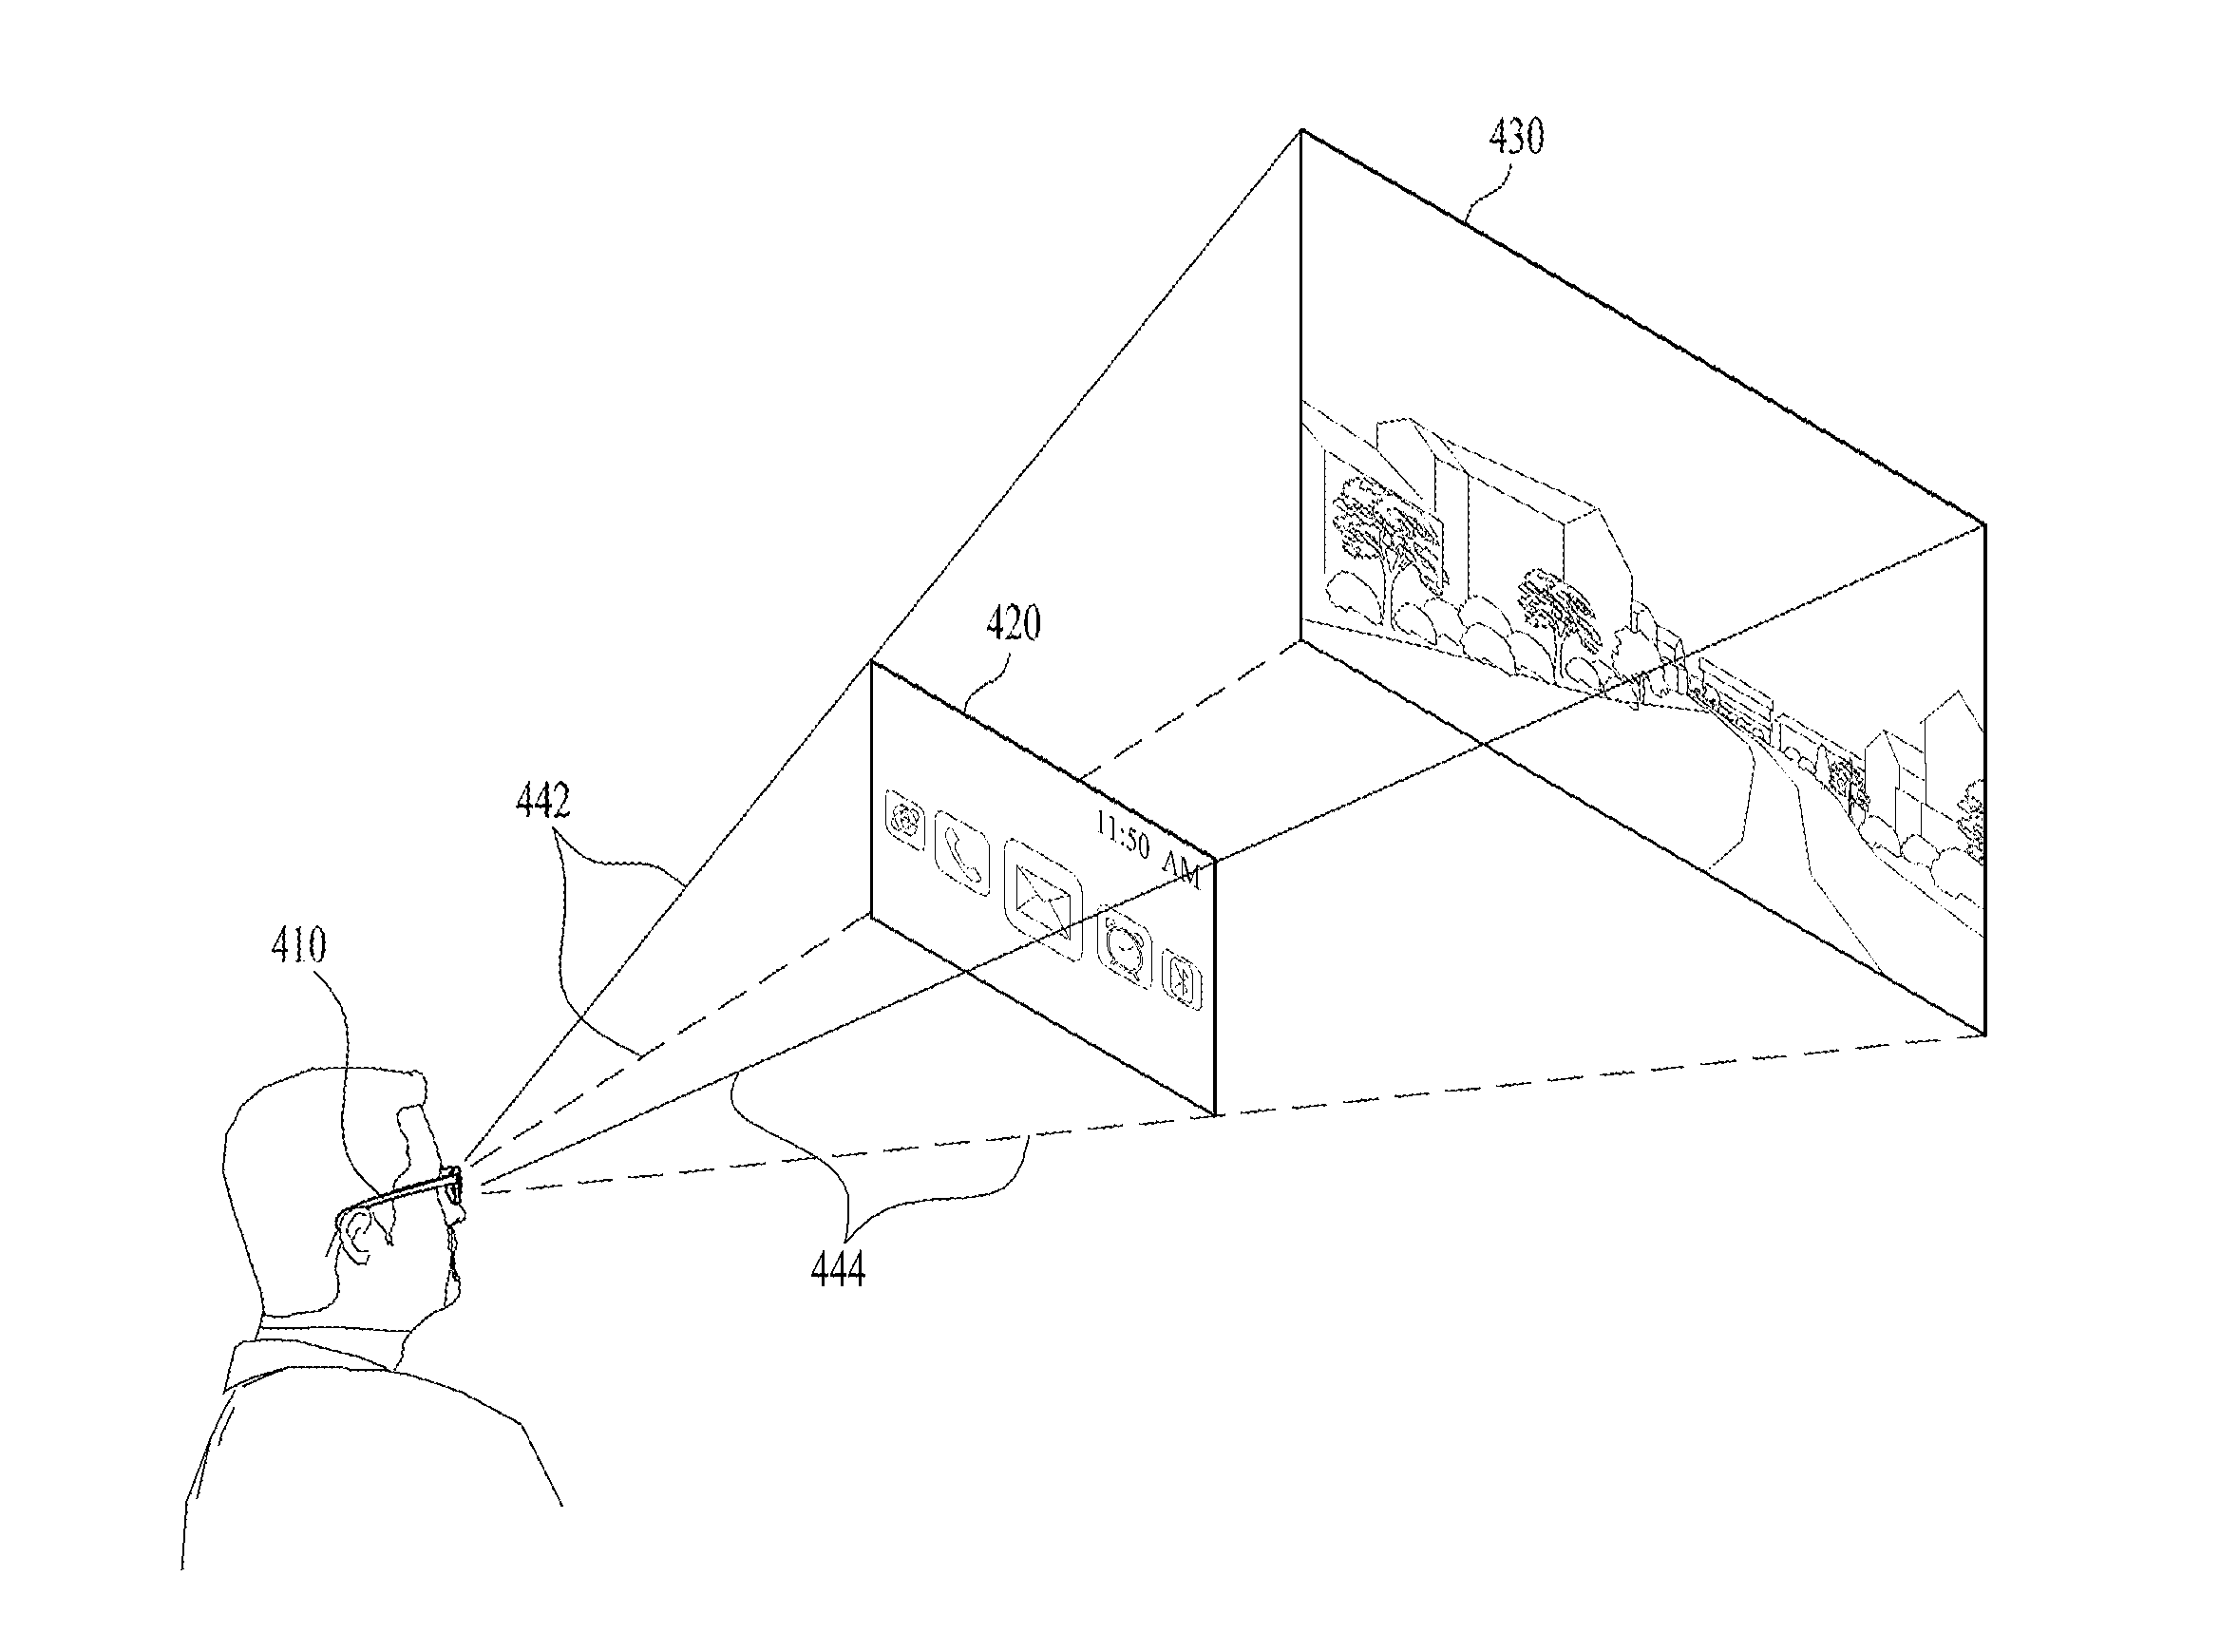 Wearable device and method of outputting content thereof